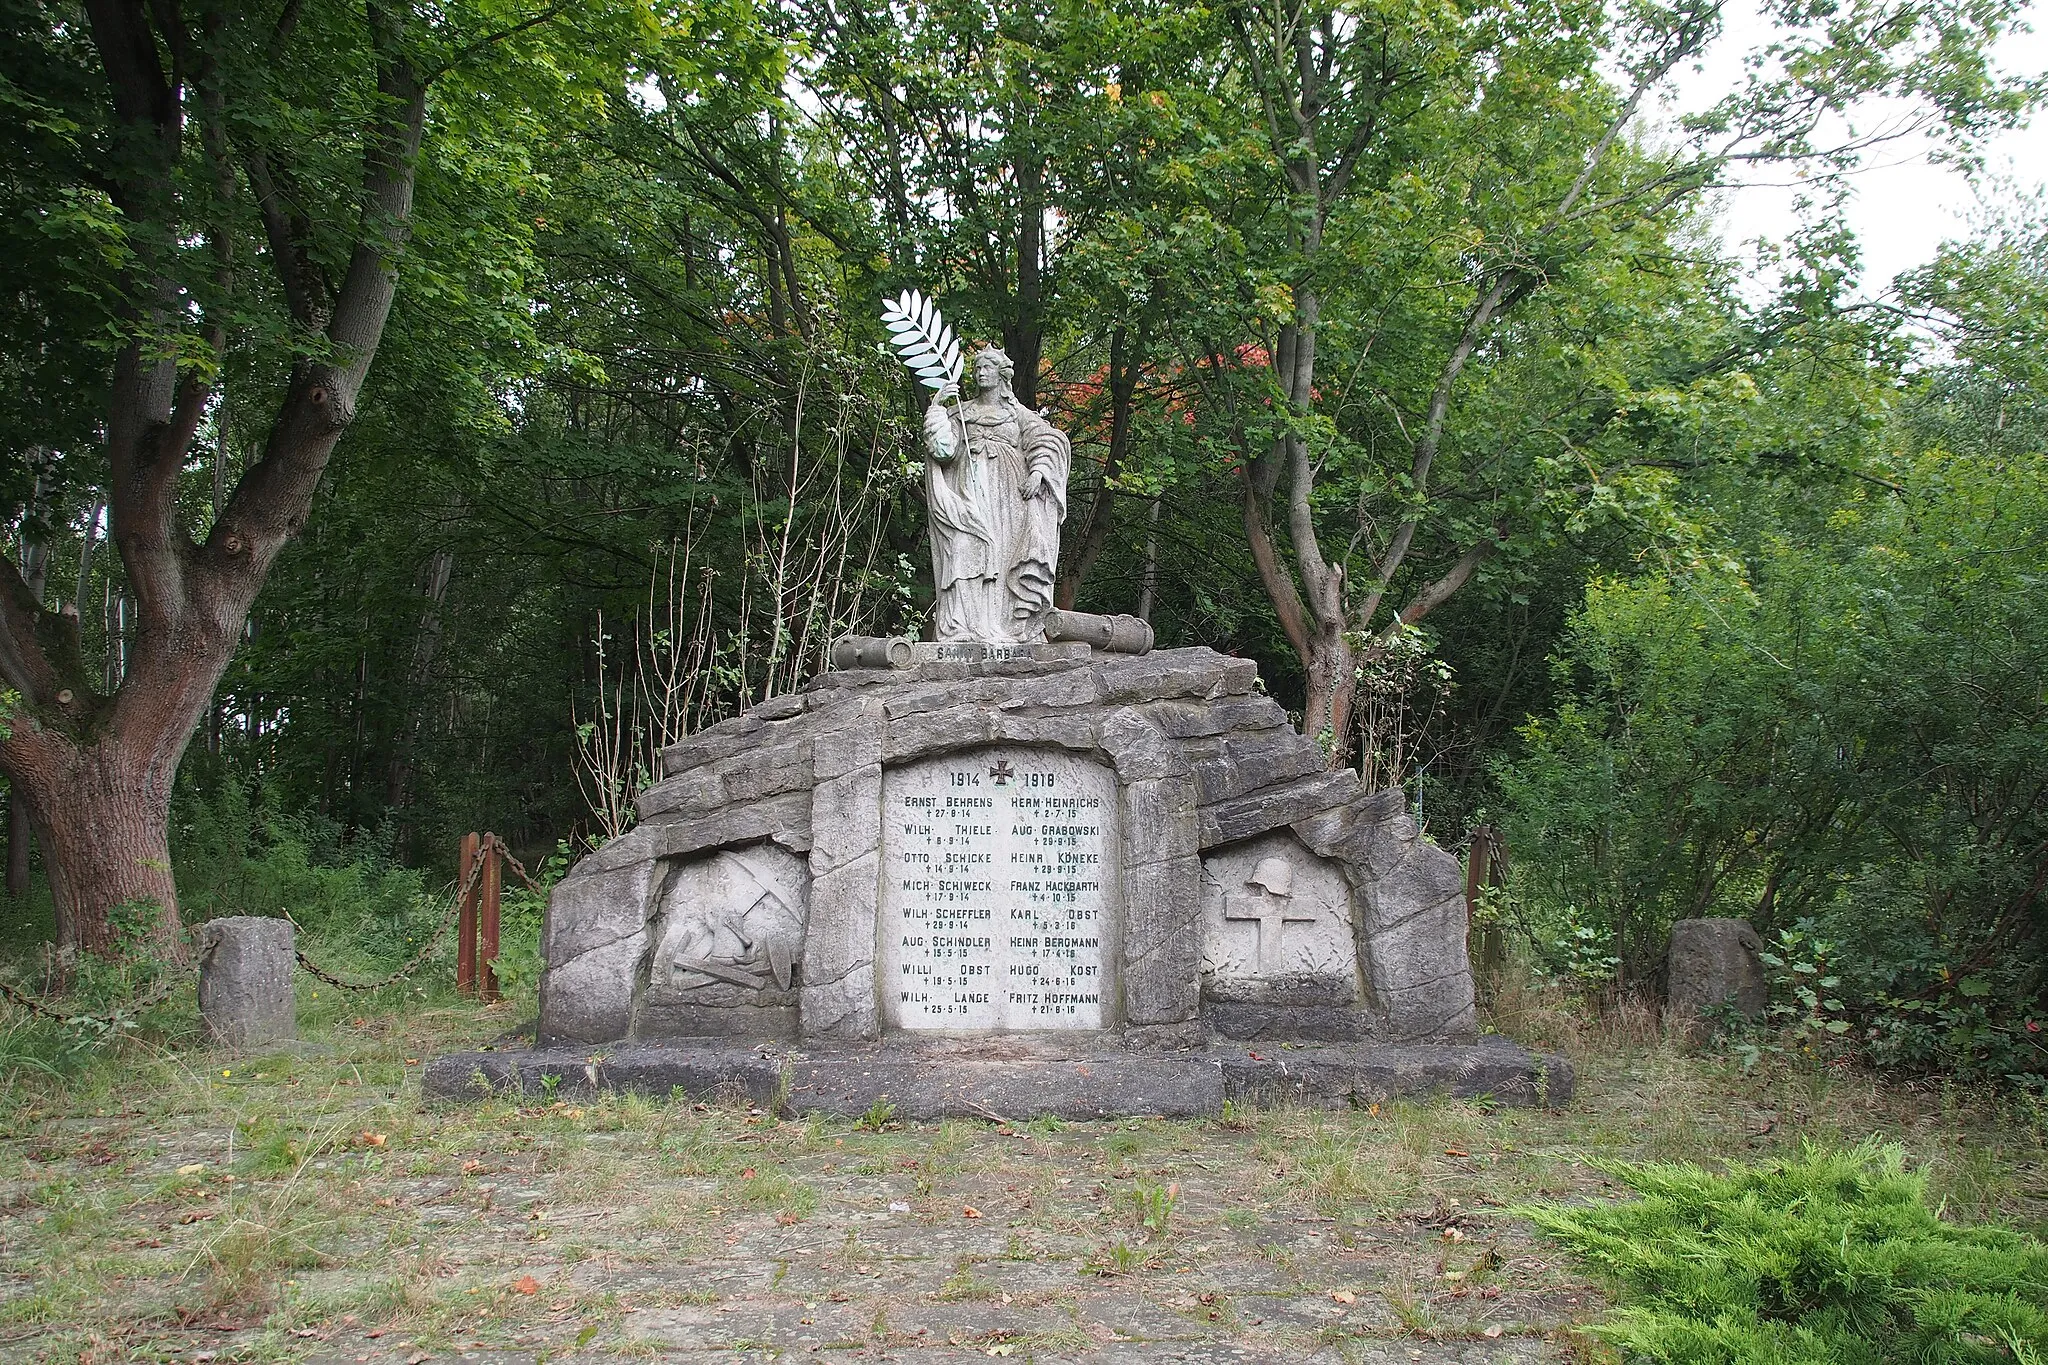 Photo showing: 1914-18 war memorial in Höfer, Lower Saxony, Germany, with Saint Barbara